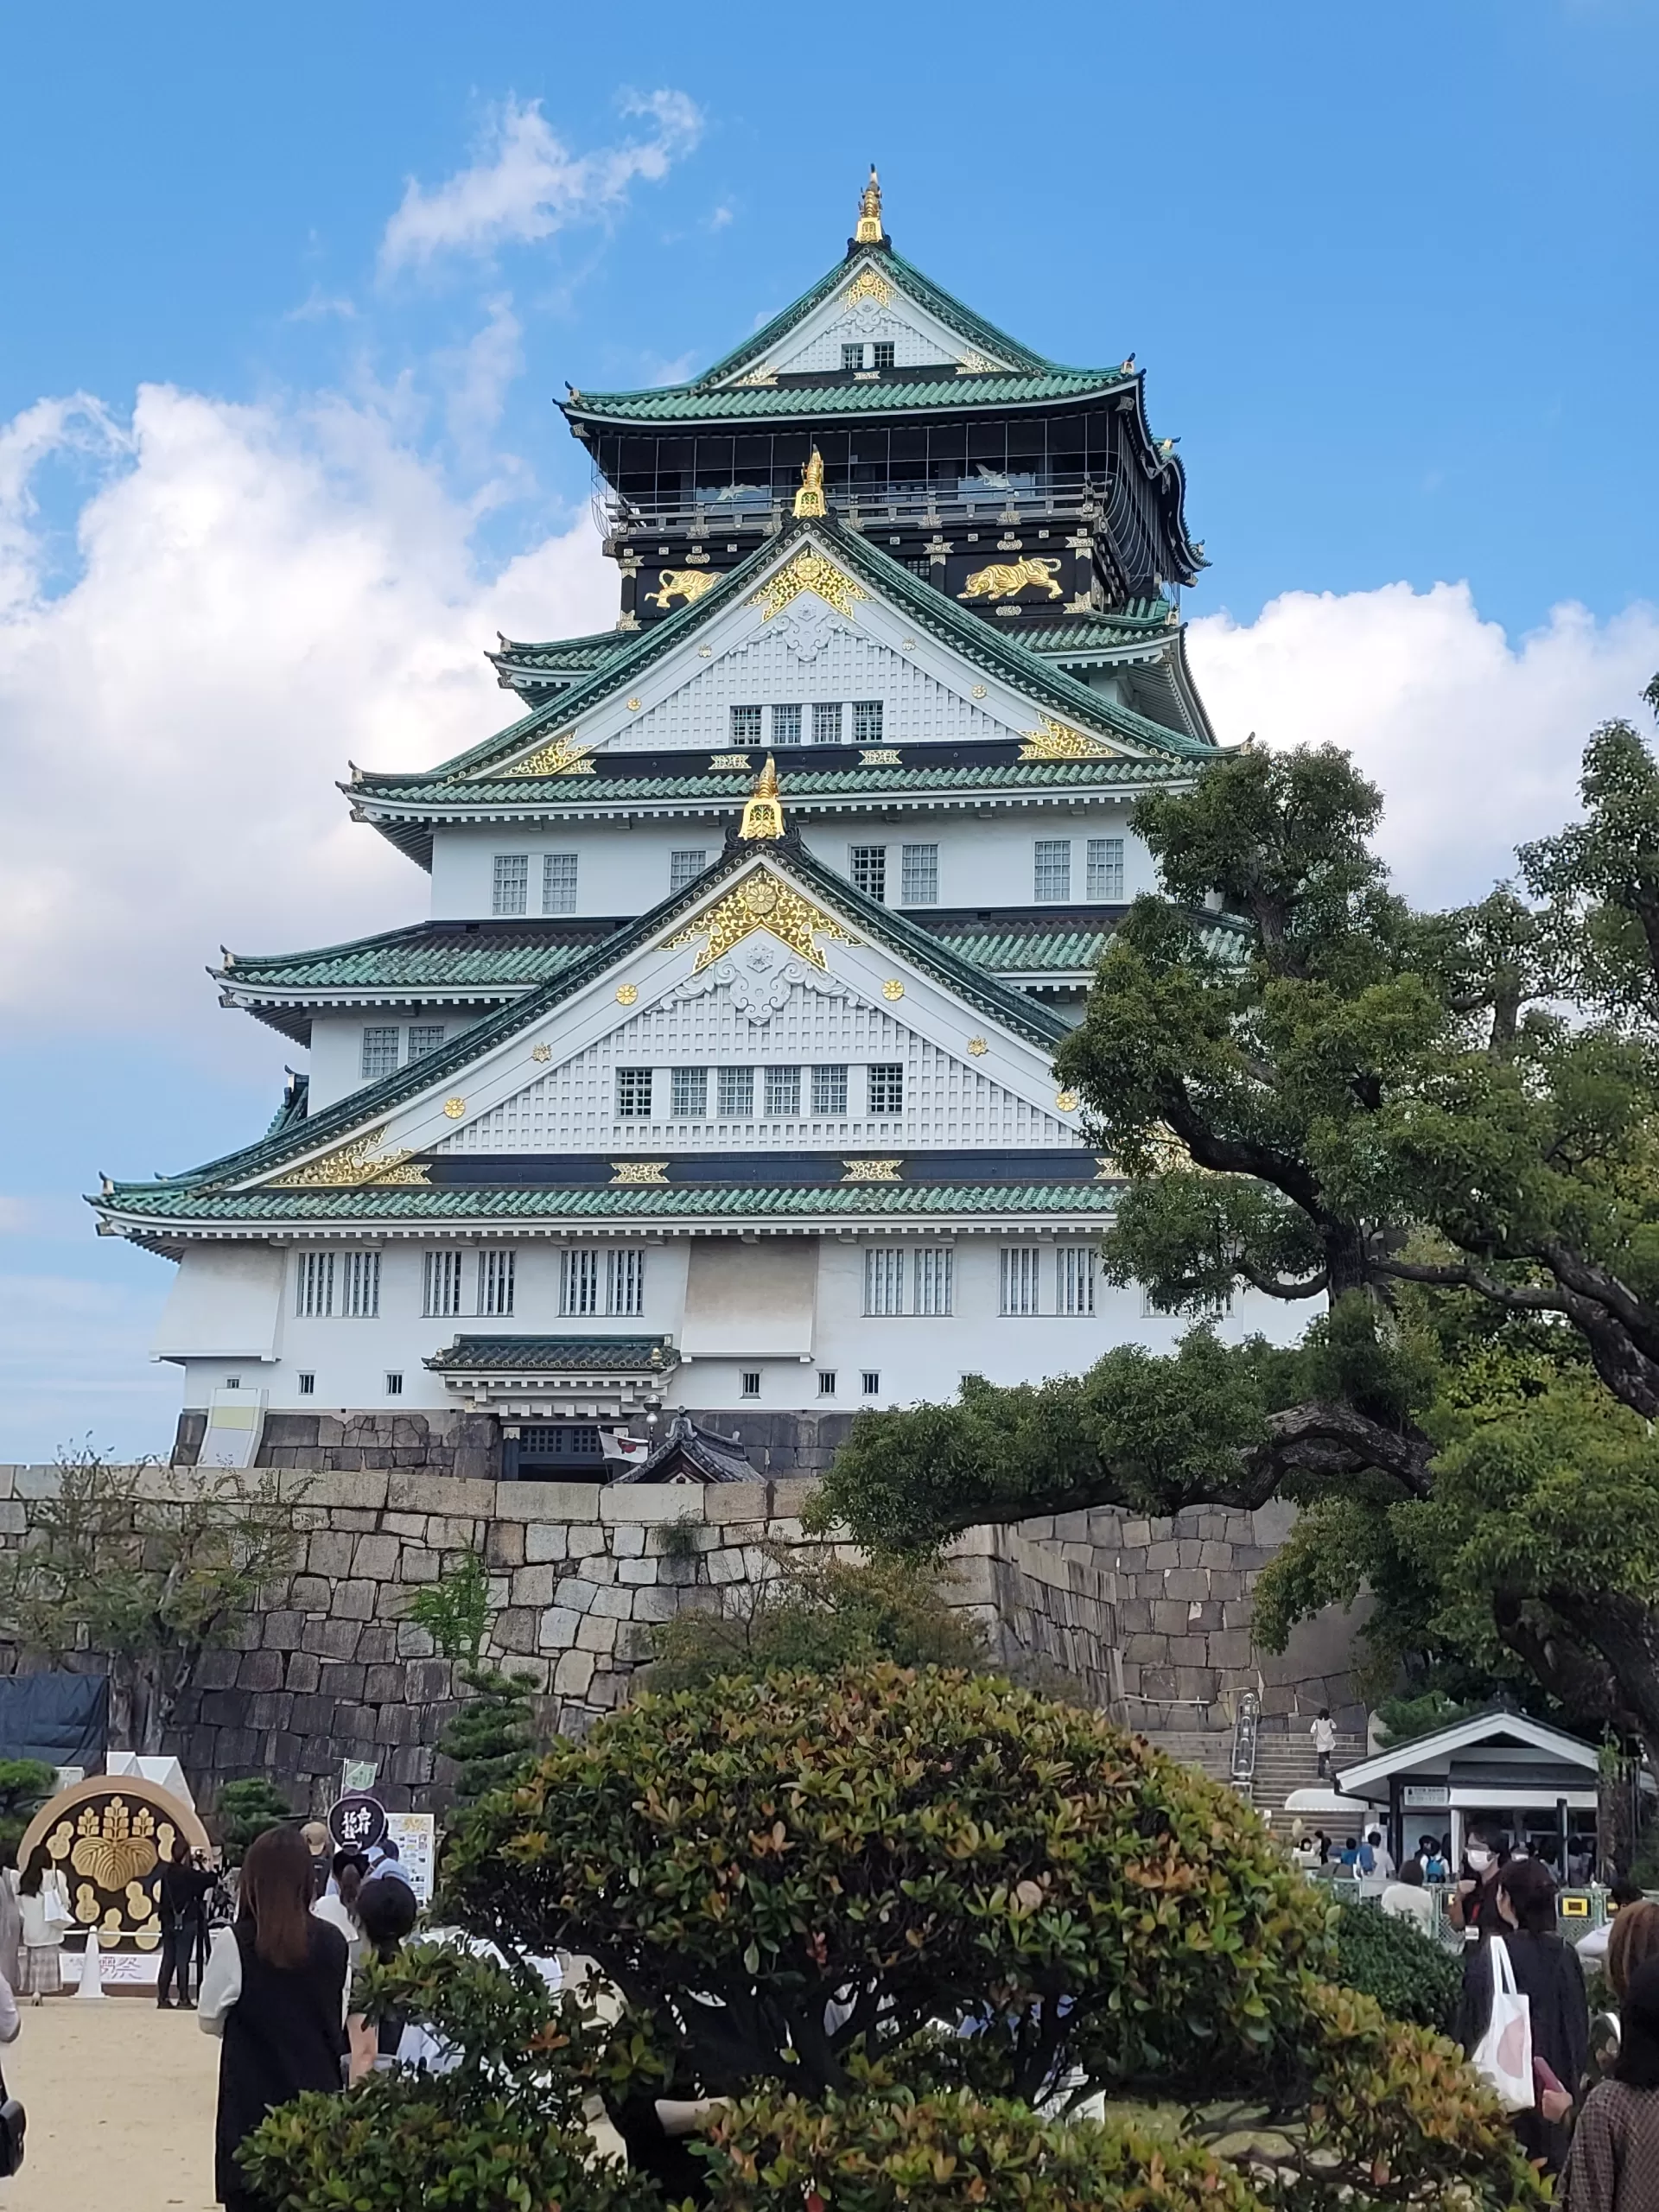 Taking a look inside the iconic Osaka Castle